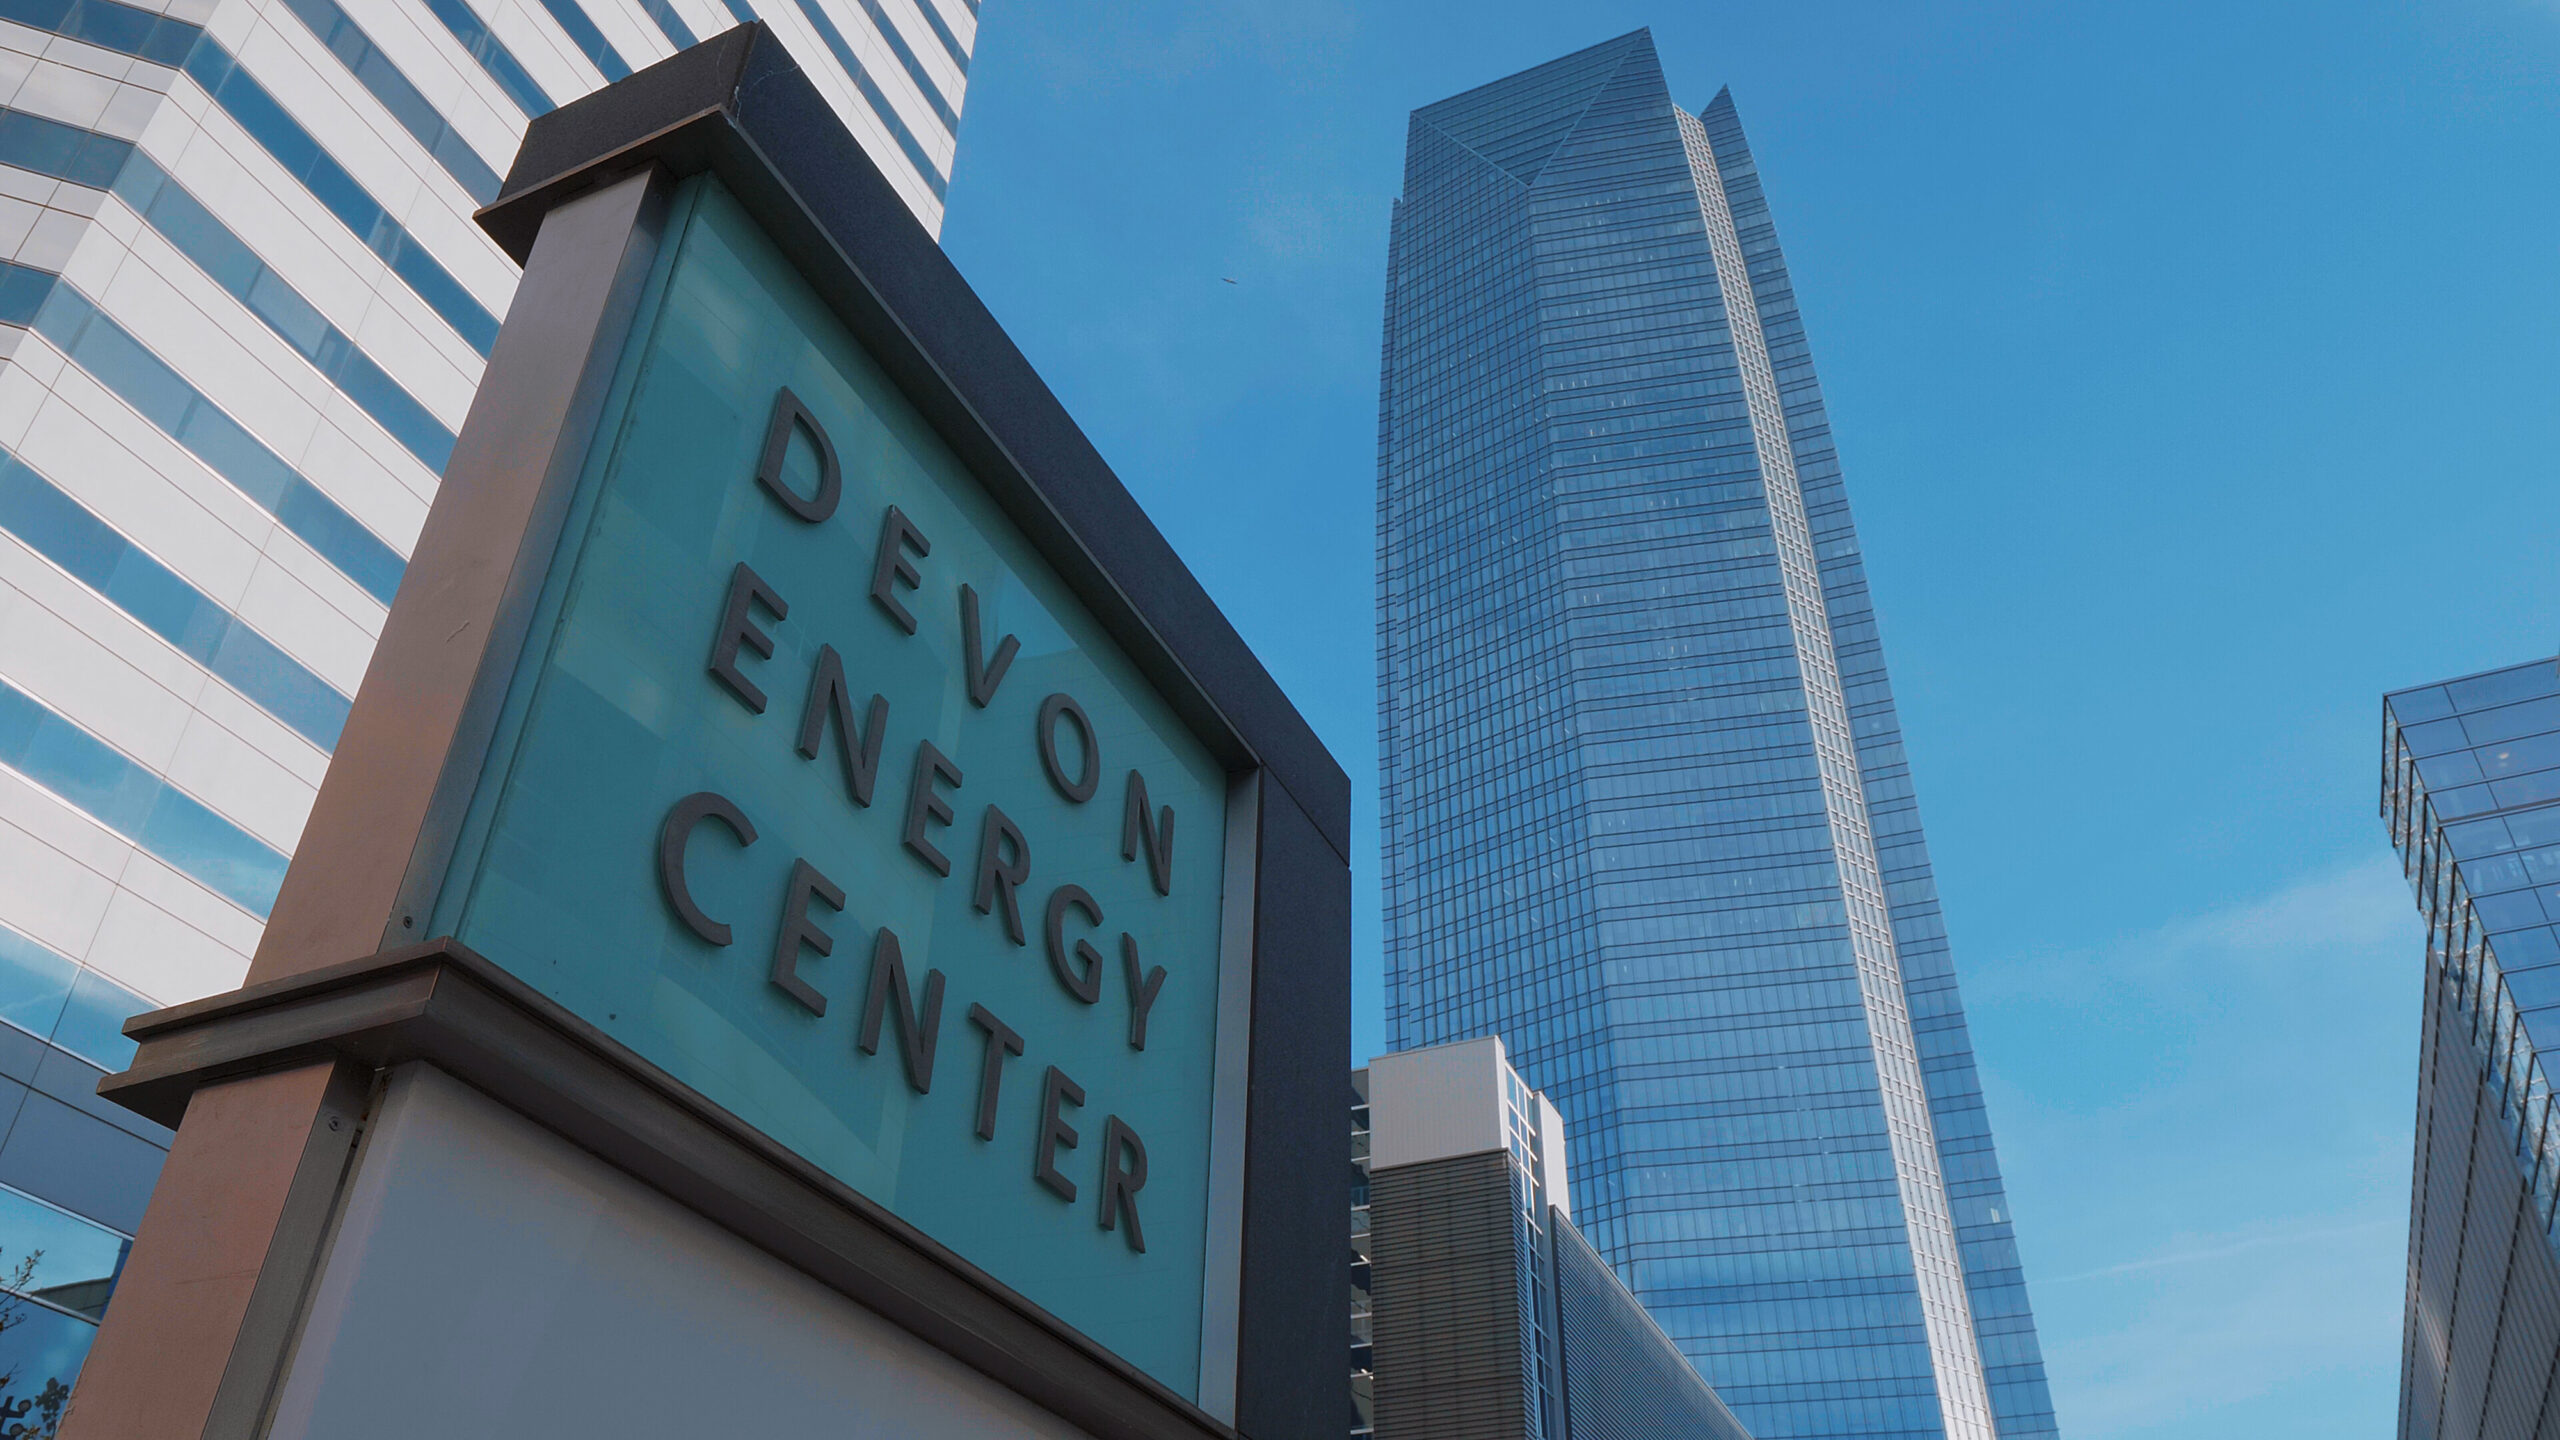 Devon Energy One of Several Oil Companies Partnering to Bring Tech Jobs to Oklahoma